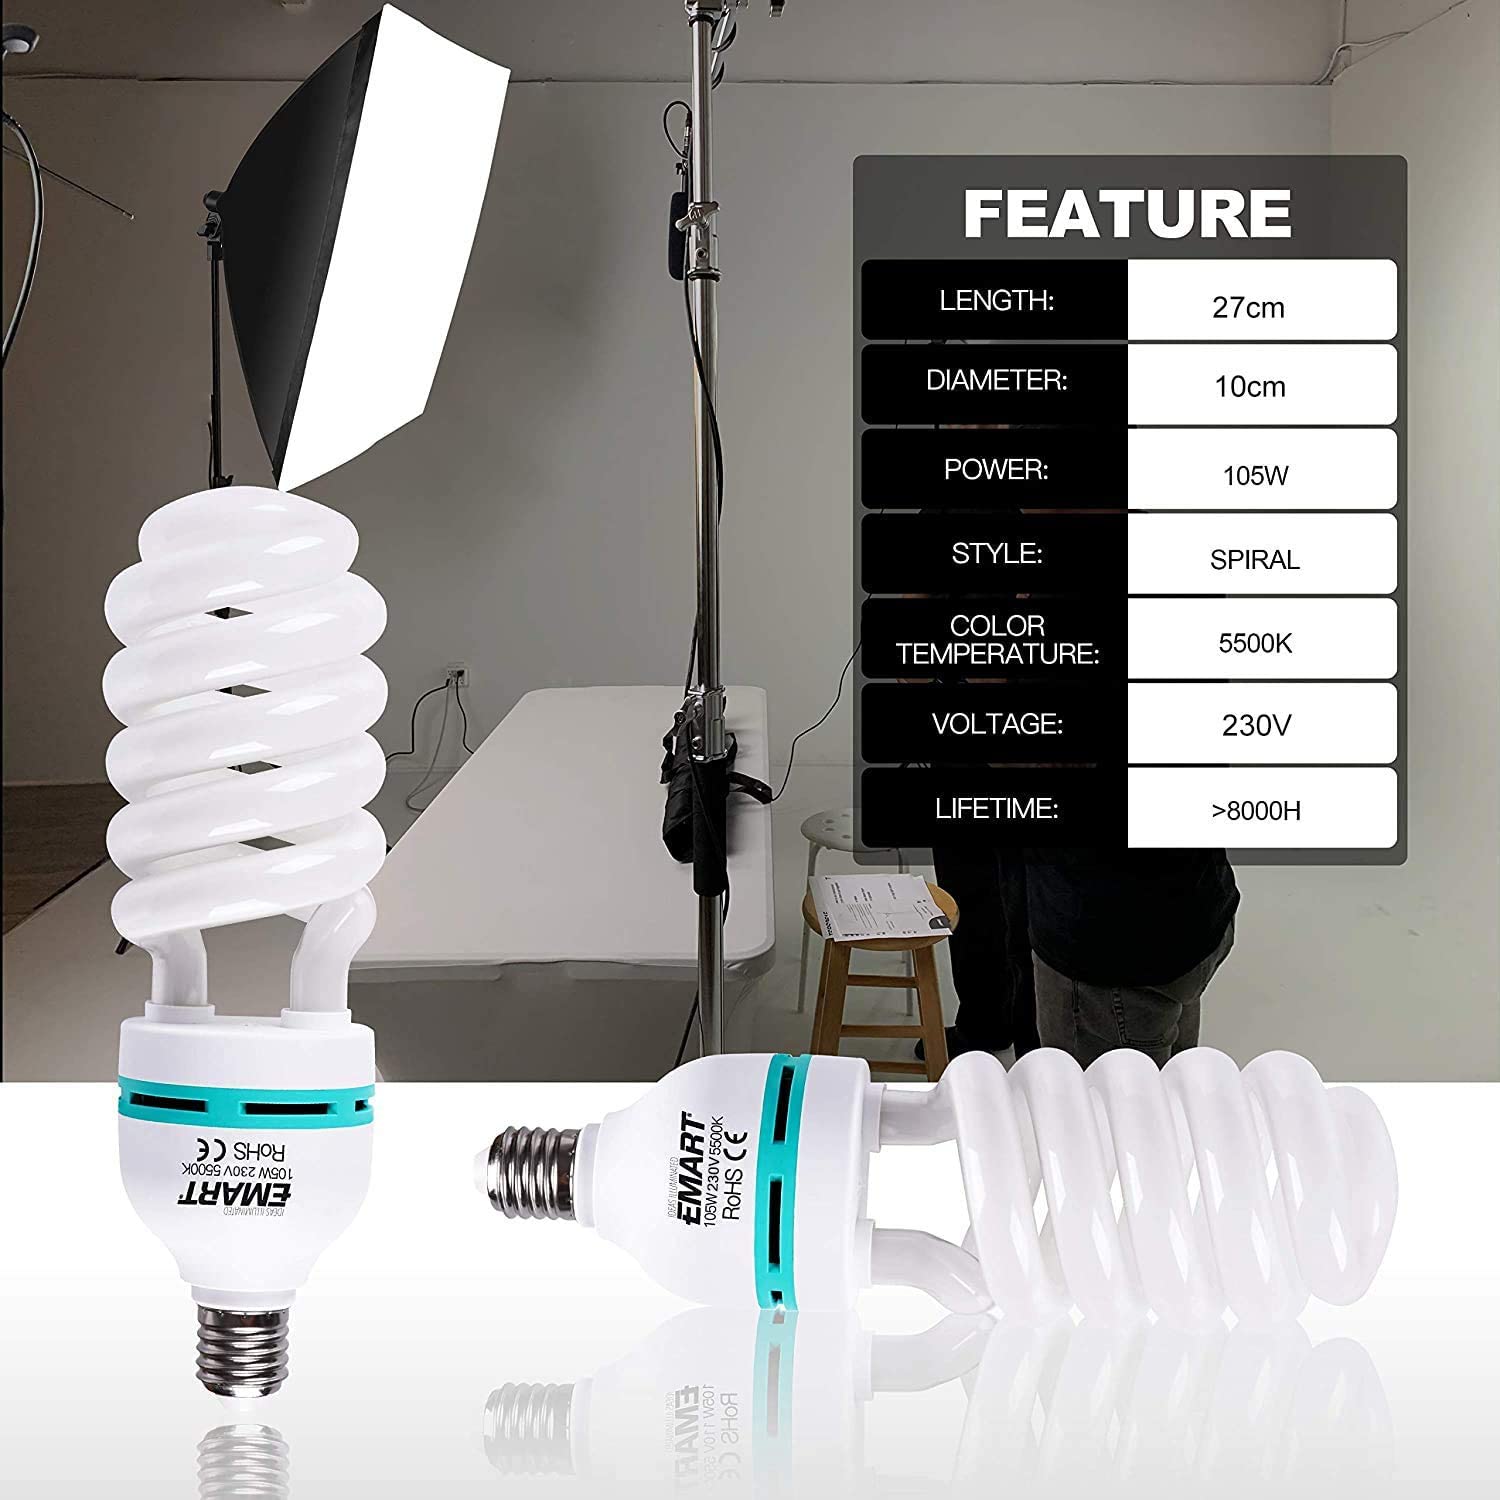 Emart Lighting Kit with Sandbags, Photo Bulbs & Continuous Light Equipment For Portraits